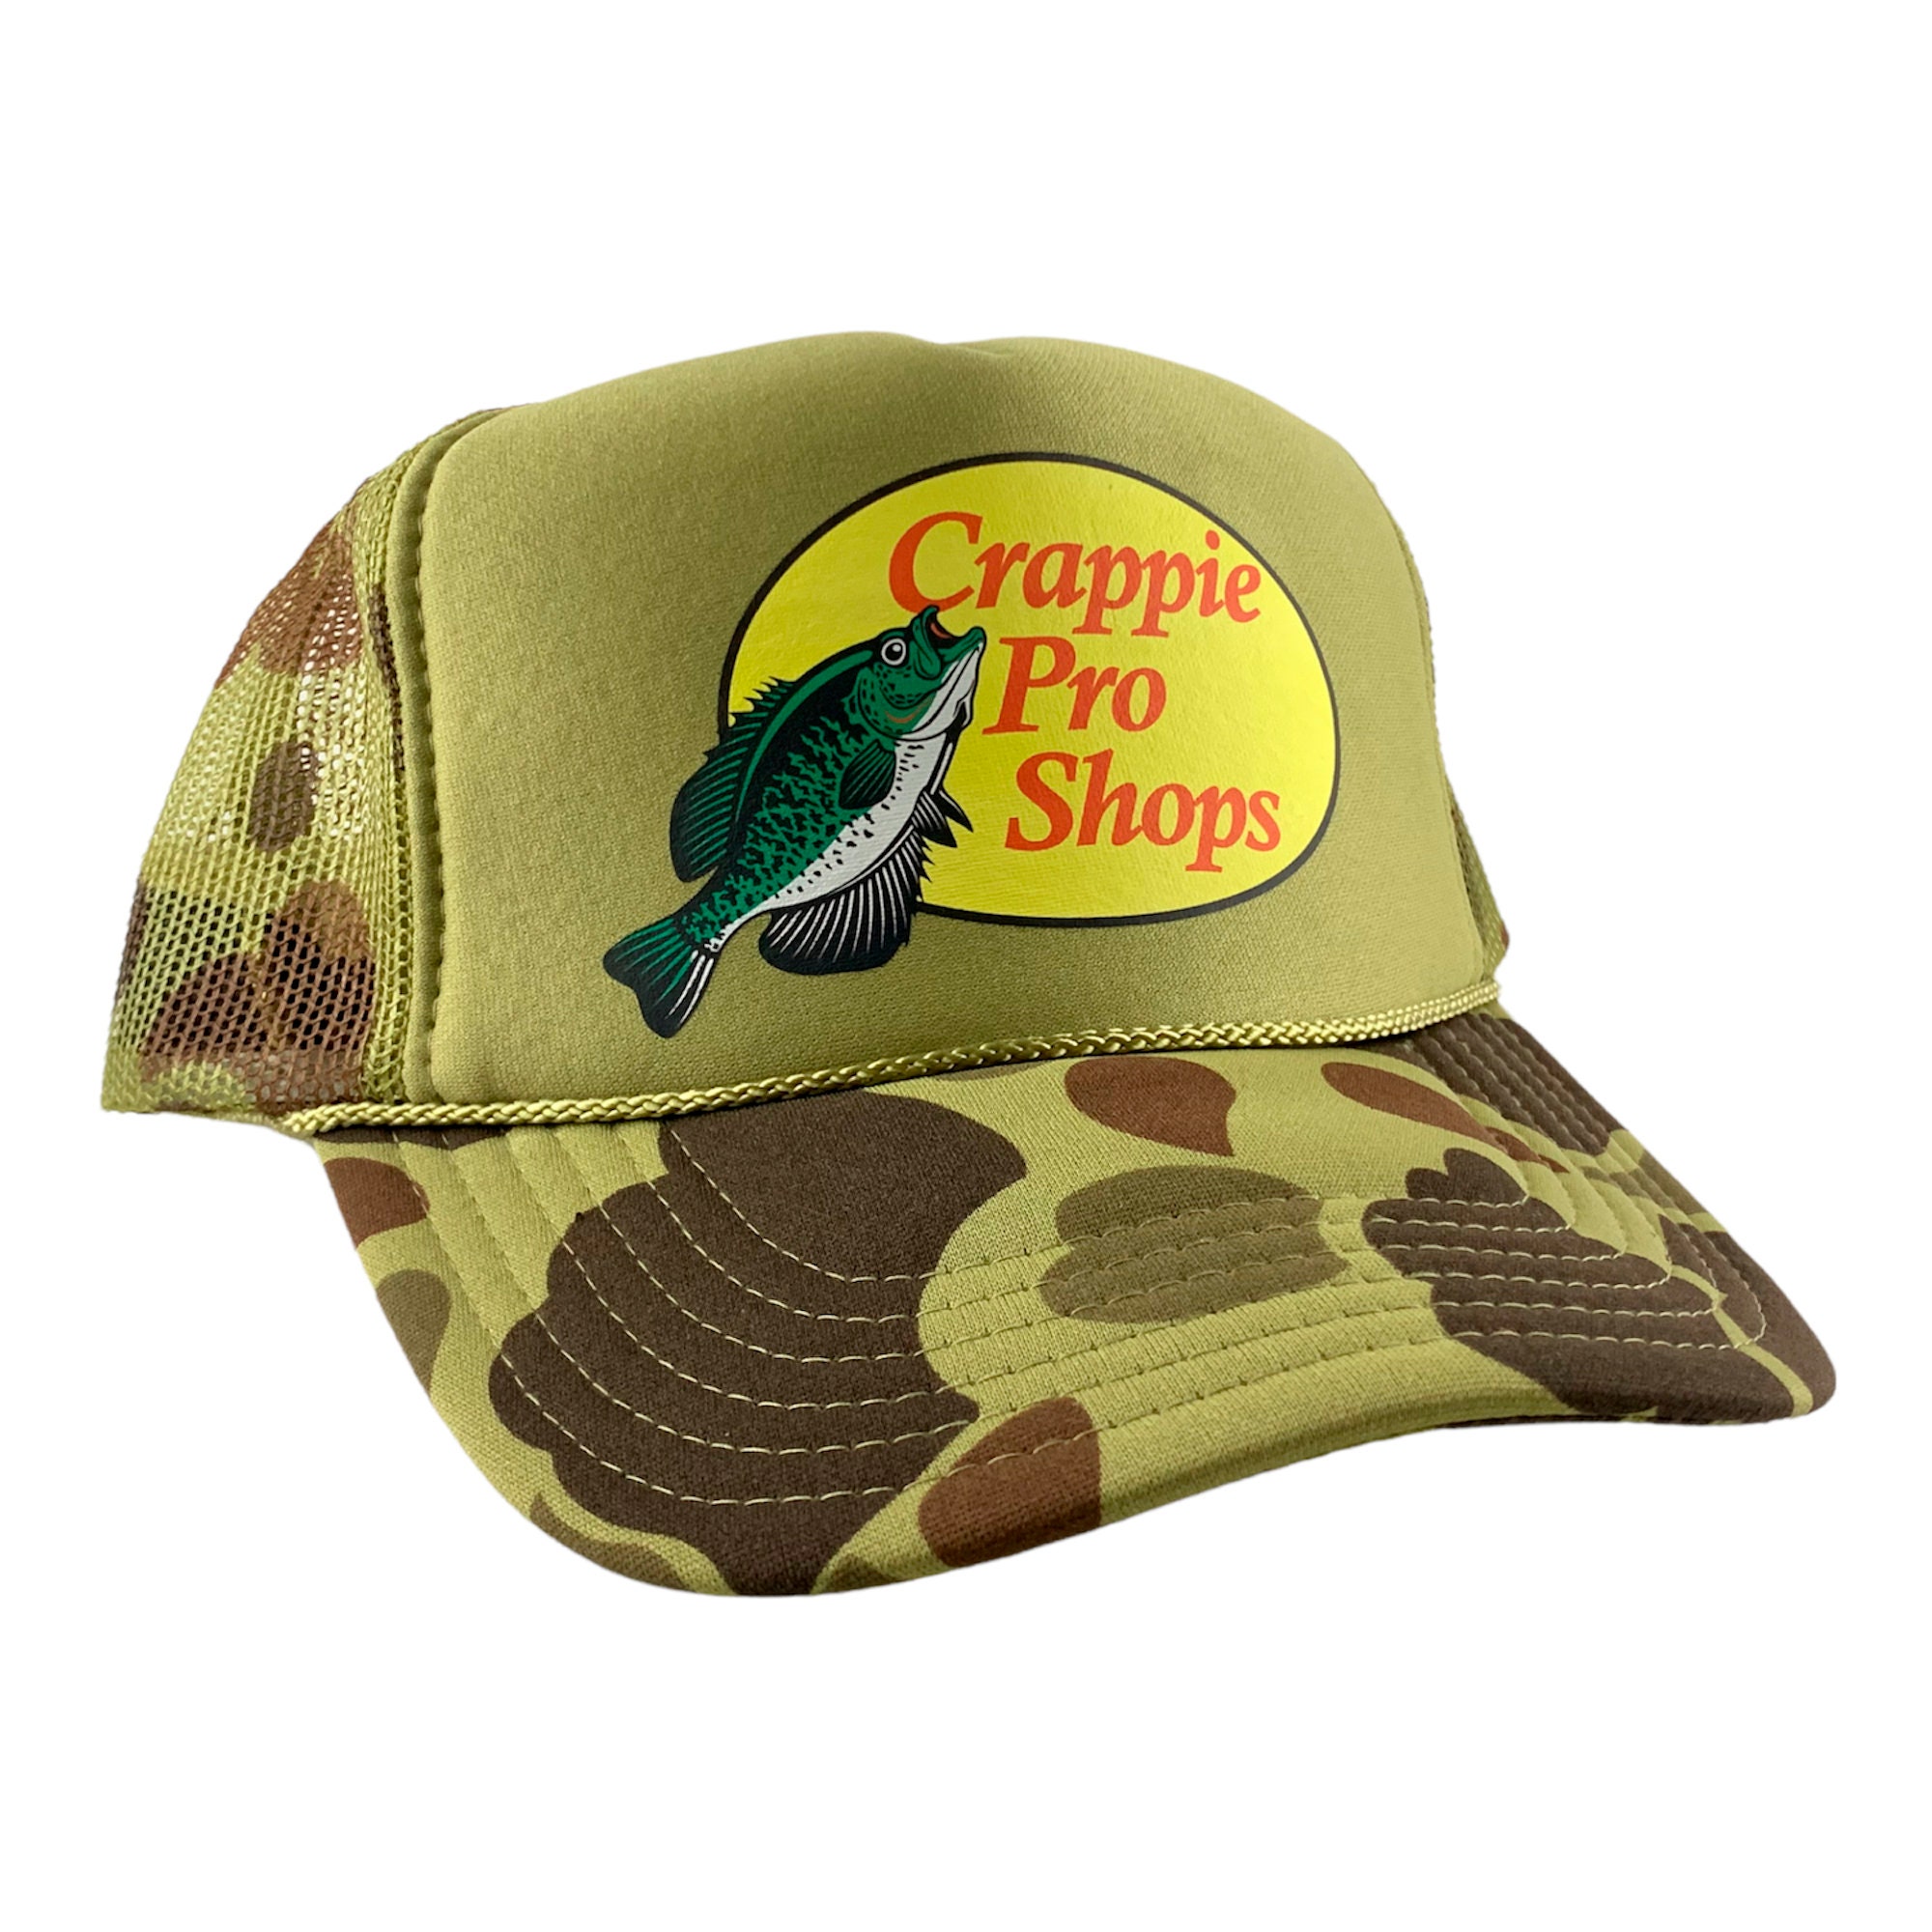 Crappie Pro Shops Hat, Trucker Hat, Fishing Hat, Father Gift, Gift for Him,  Mesh Hat, Cap, Camo Hat, Lake Hat, Father's Day, Dad, Fish Hat -  Canada